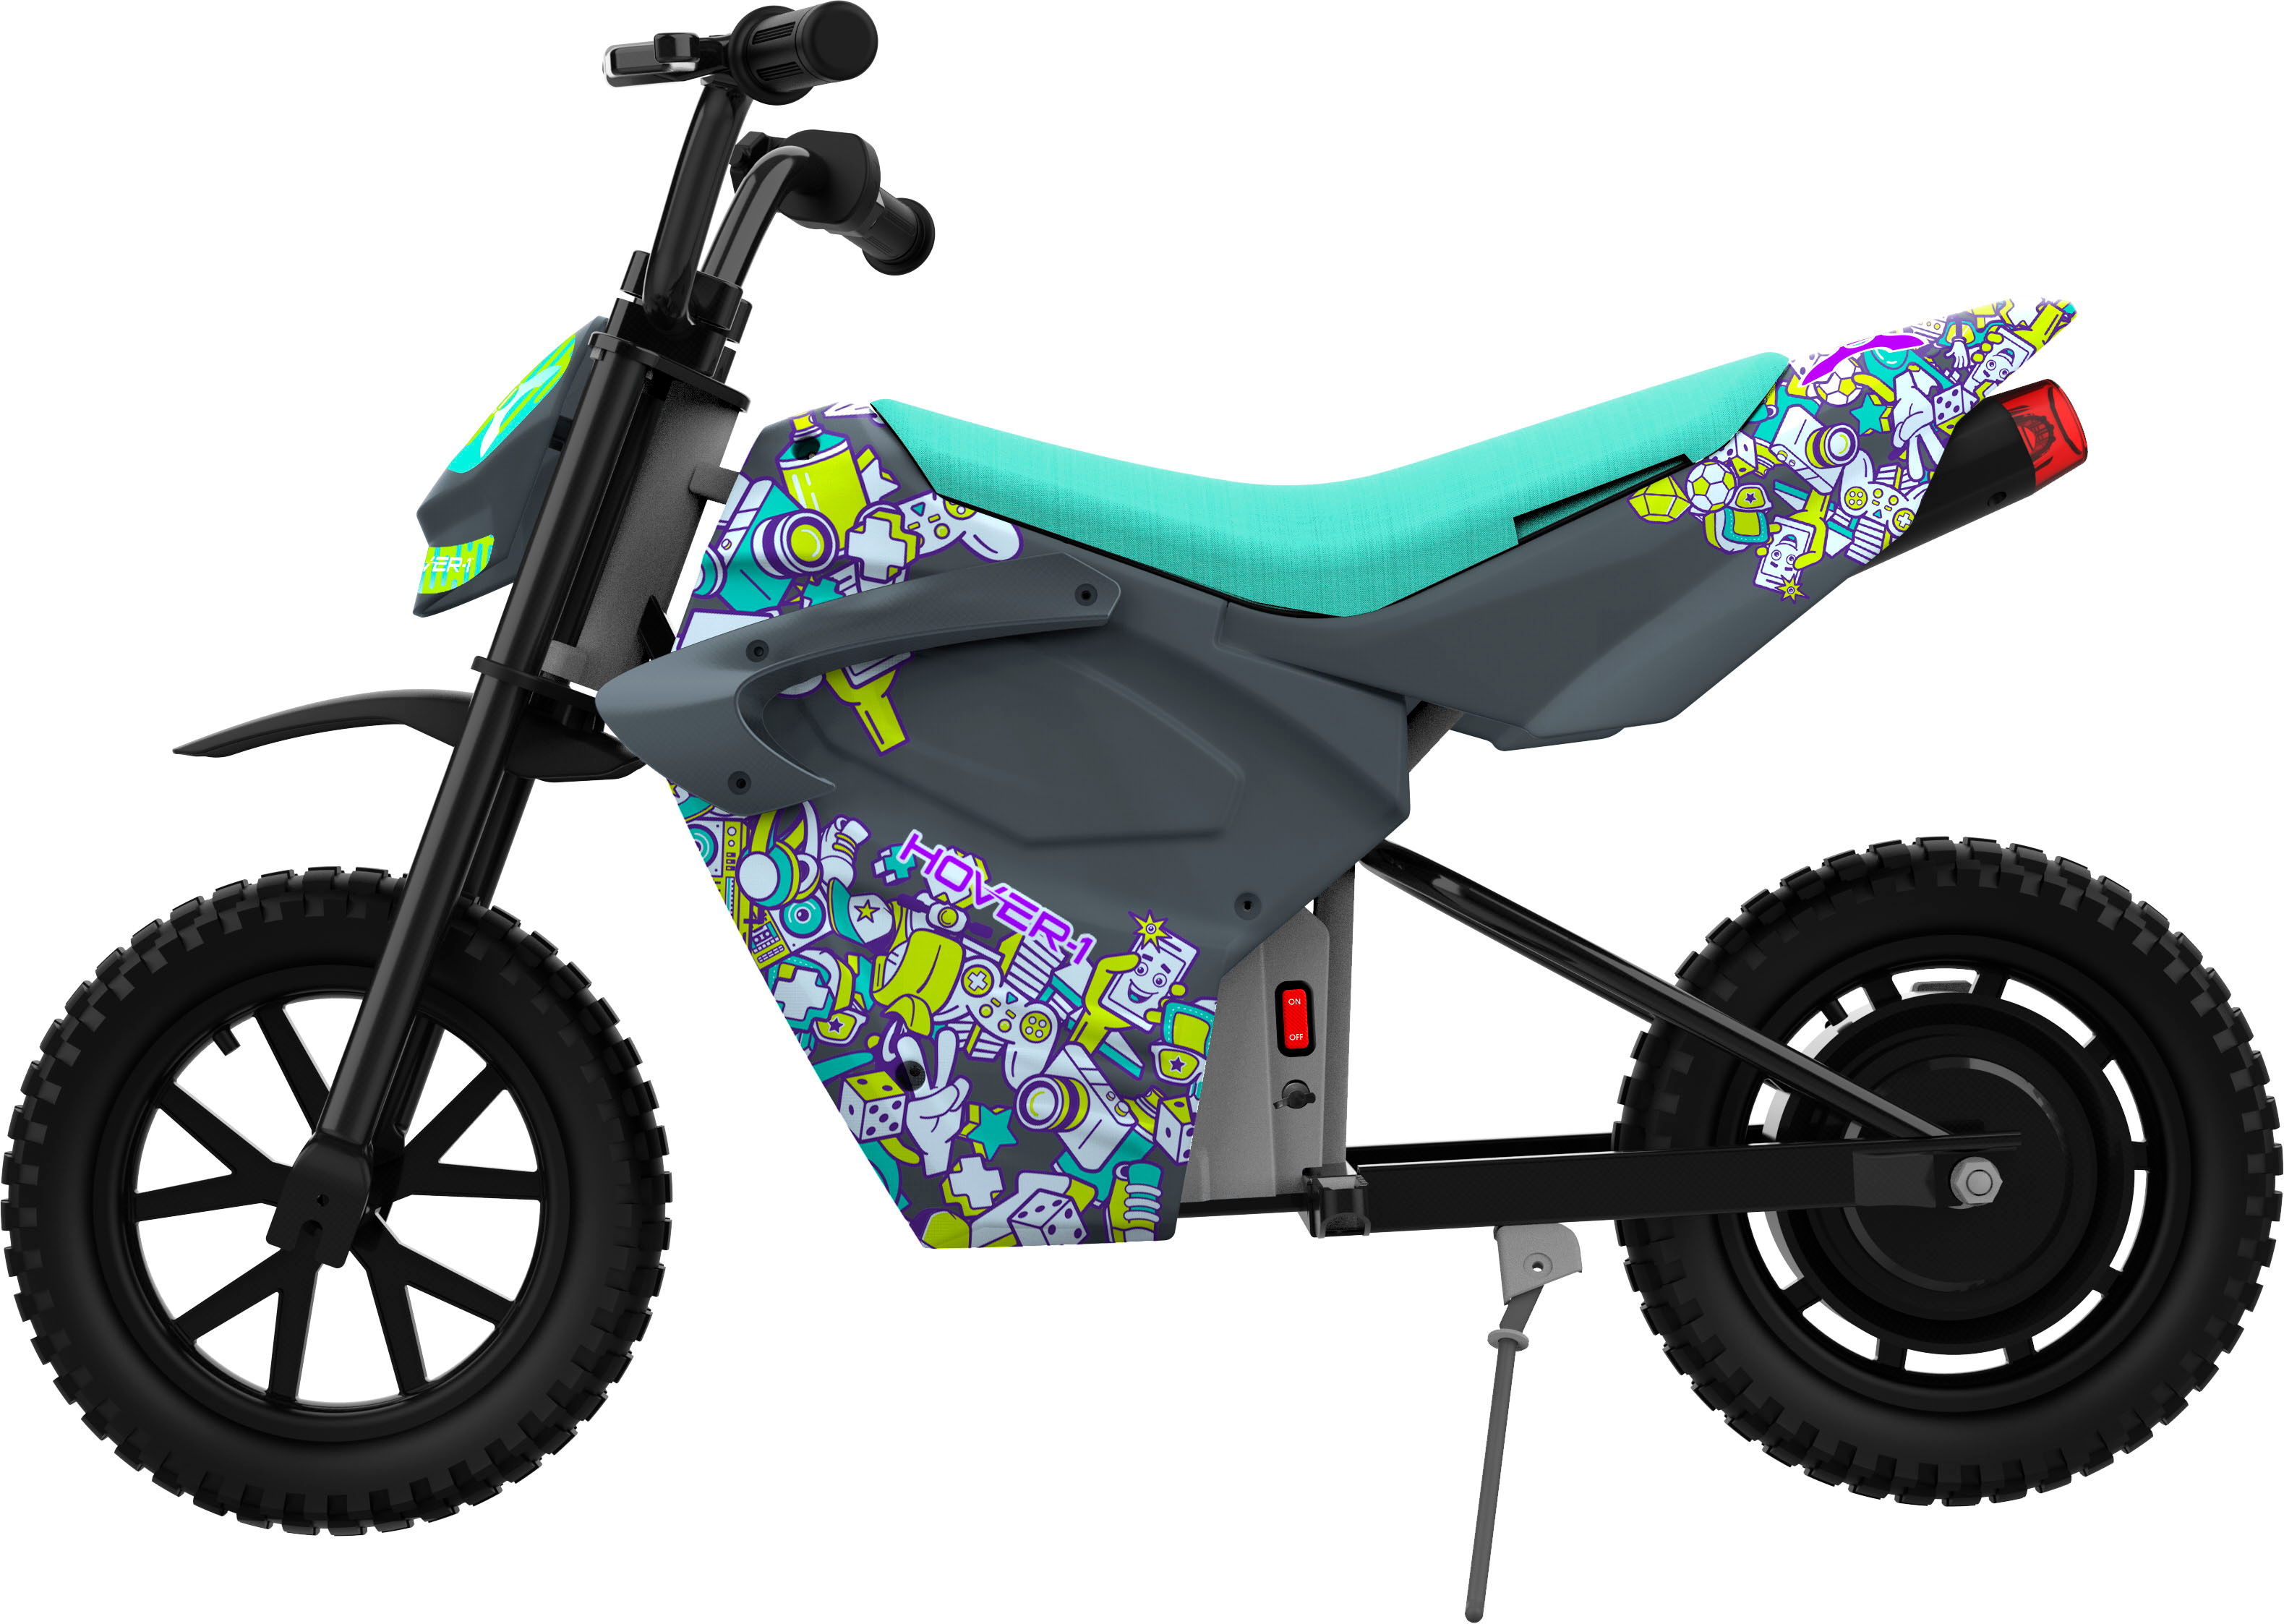 Angle View: Electric Motorcycle for Kids 3-Wheel Trike - Battery Powered Fun Decals, Reverse, and Headlights by Toy Time - Green